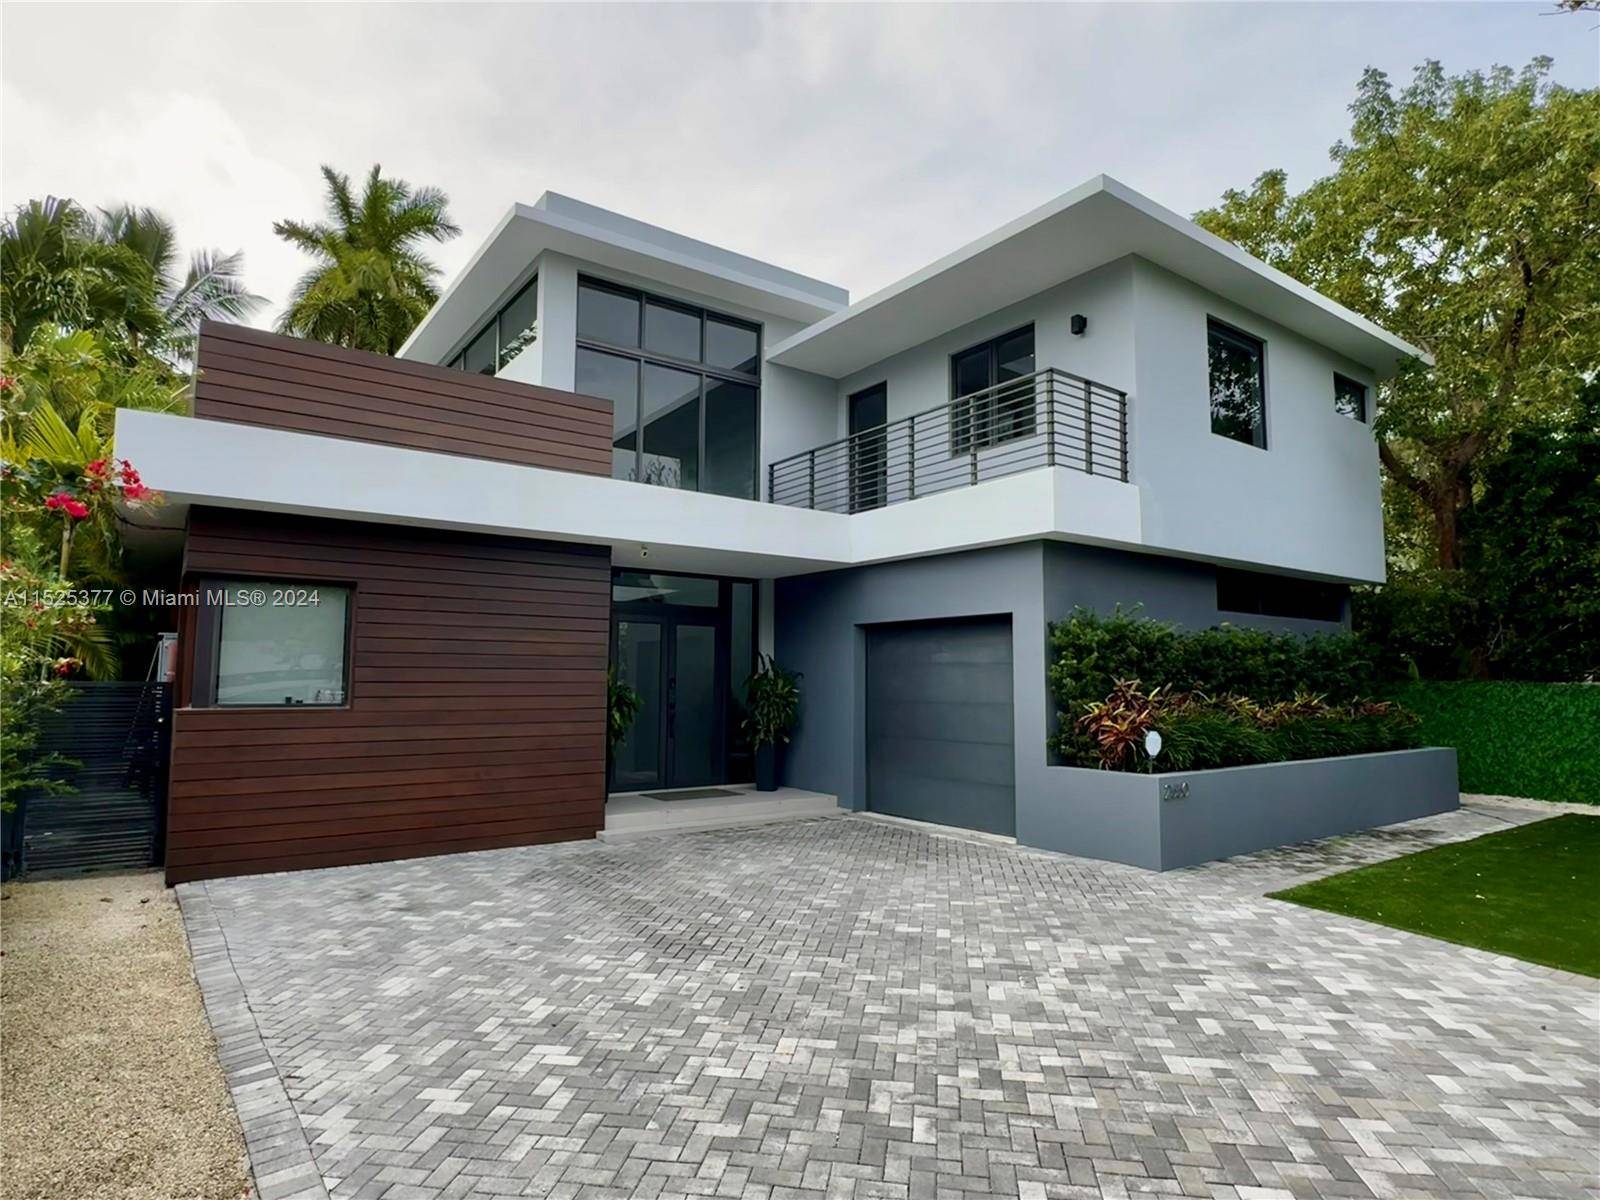 Luxurious 4BR, 4. 5BA modern haven at 2550 Overbrook St, Miami.